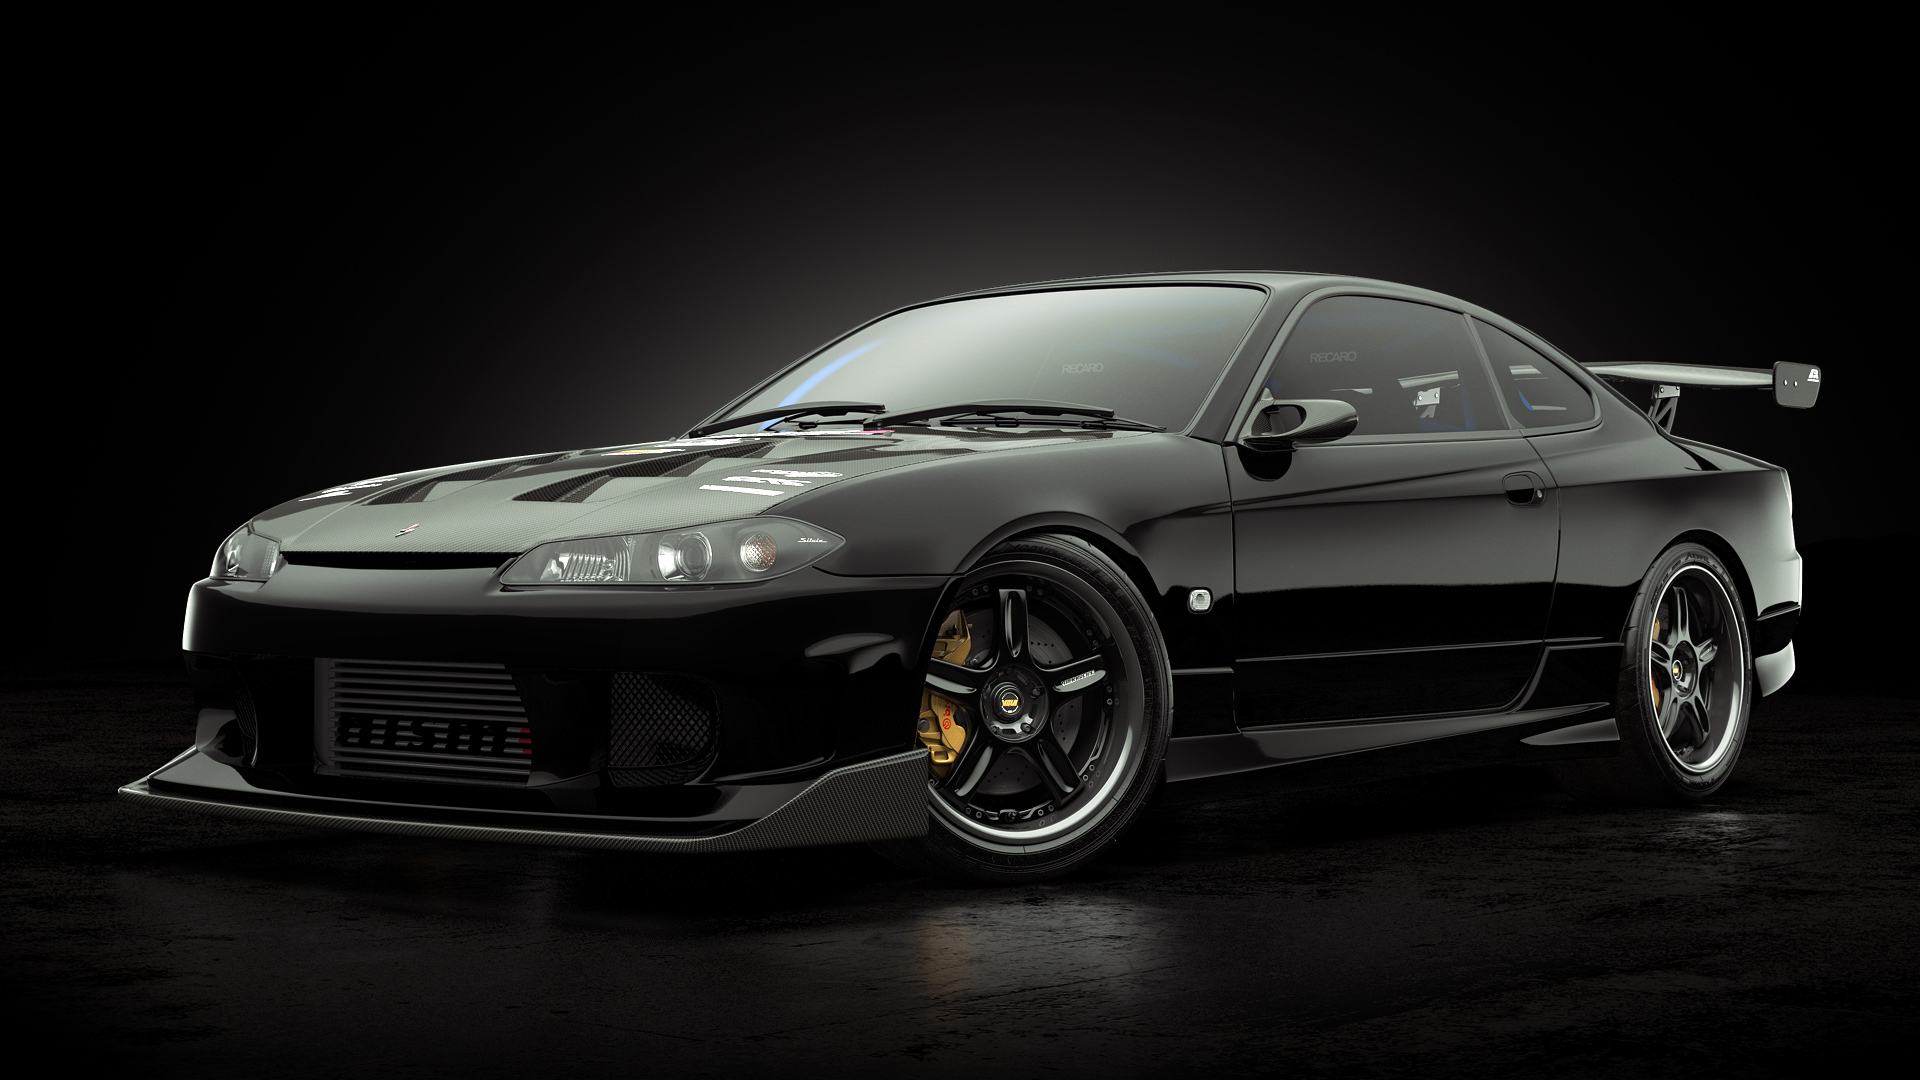 Related Pictures Nissan Silvia S15 Jdm Wallpaper Art HD Car